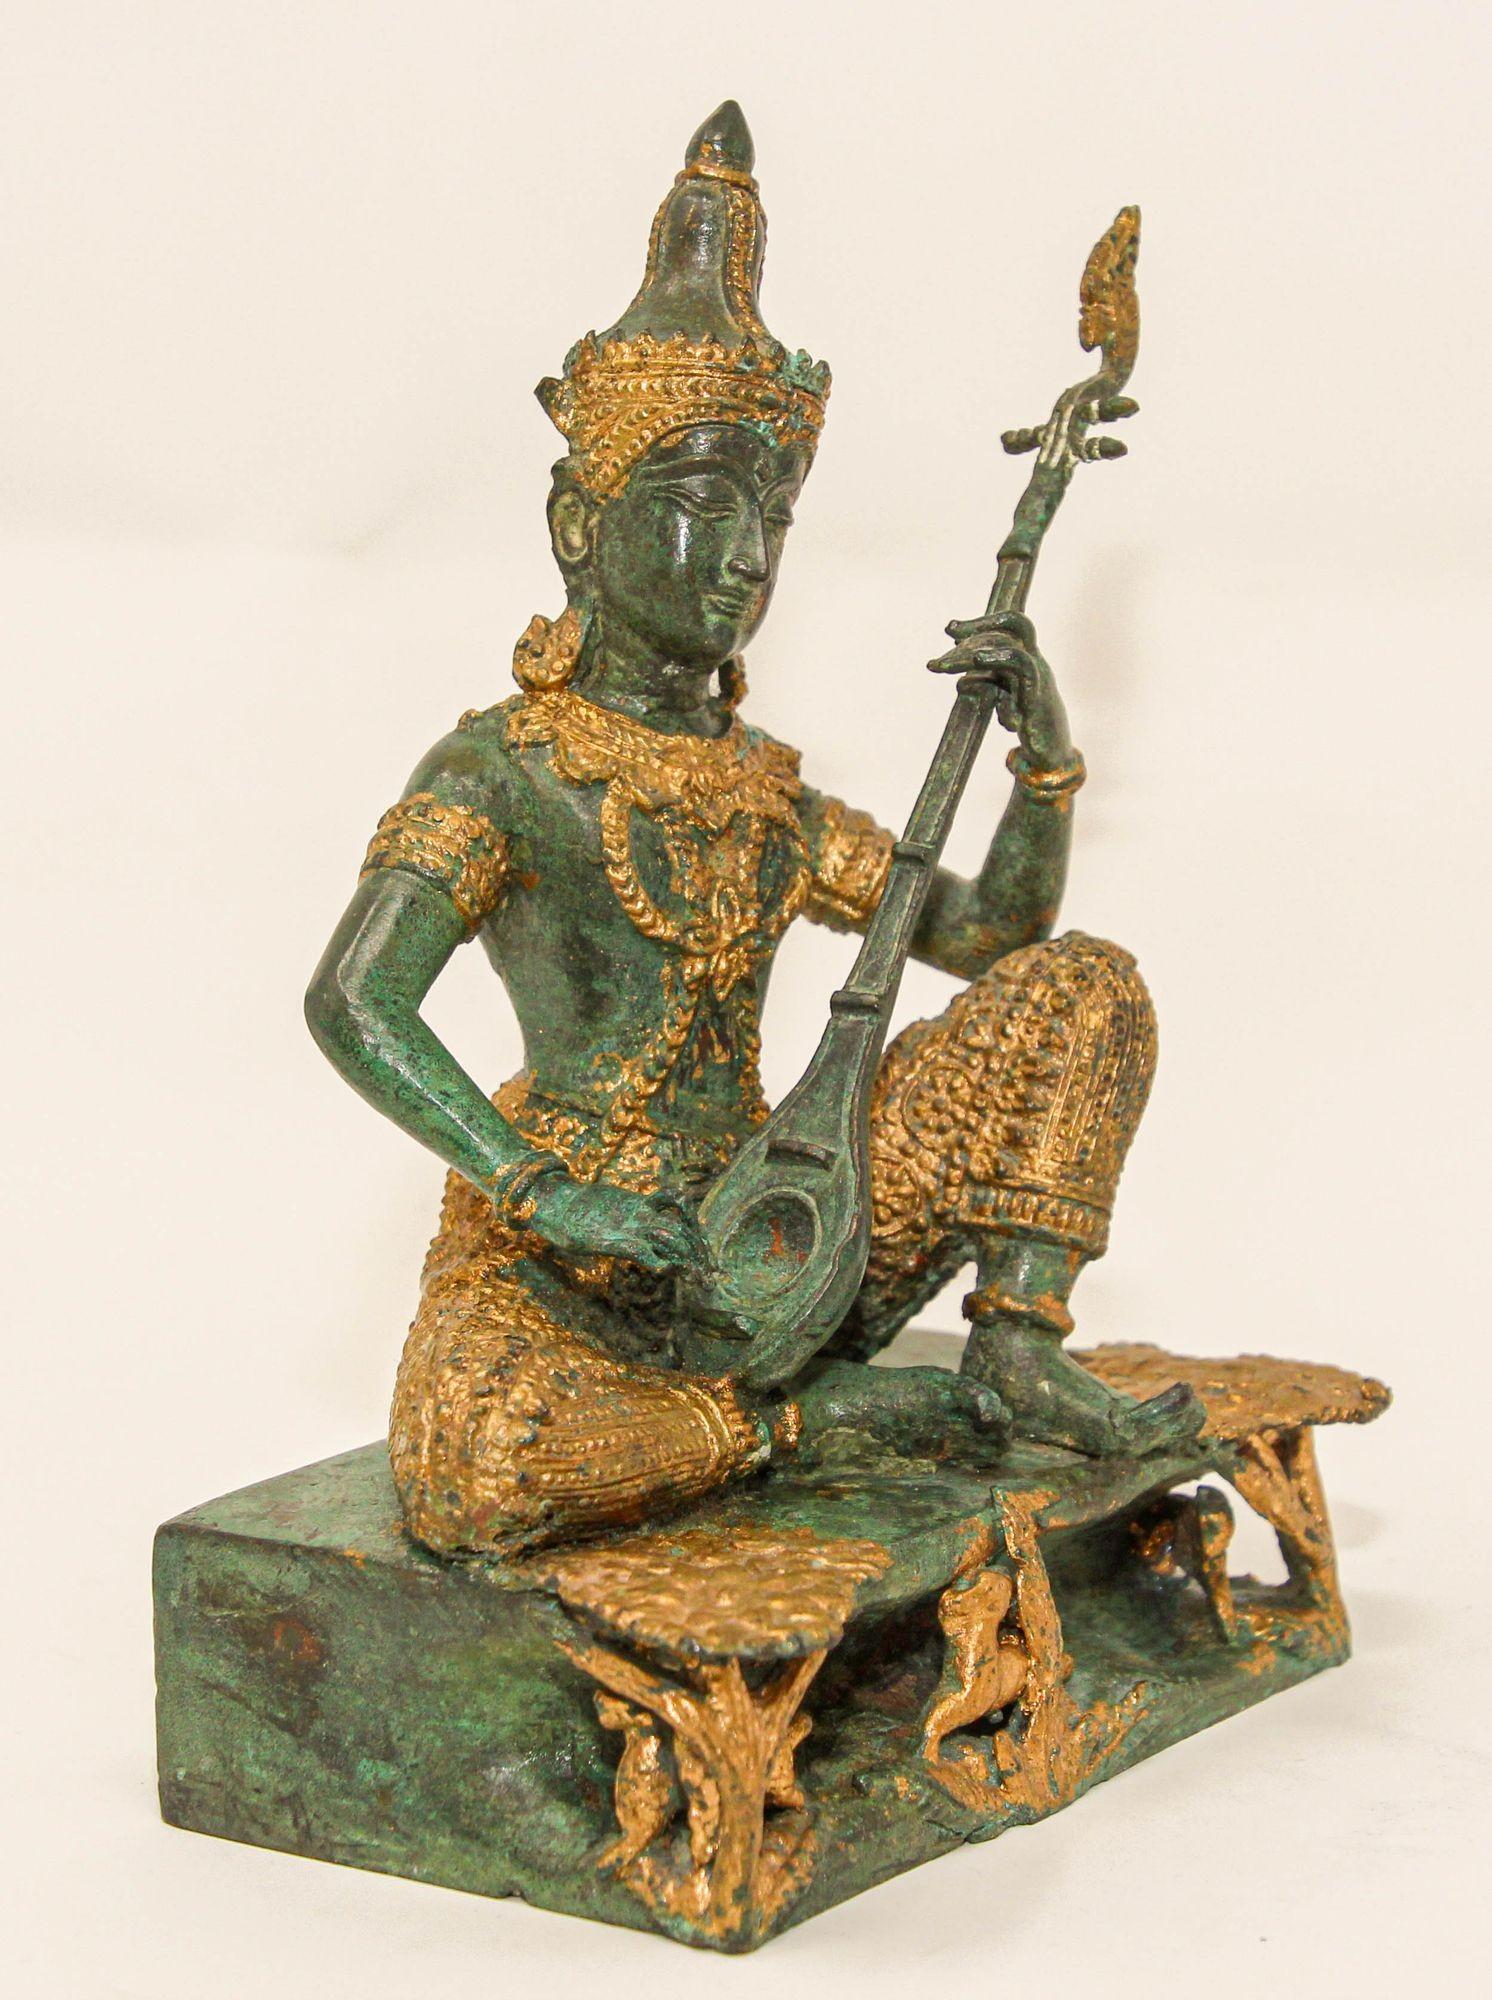 Vintage Gilt Bronze Asian Sculpture of a Thai Deity Prince Playing Music 1950s For Sale 1